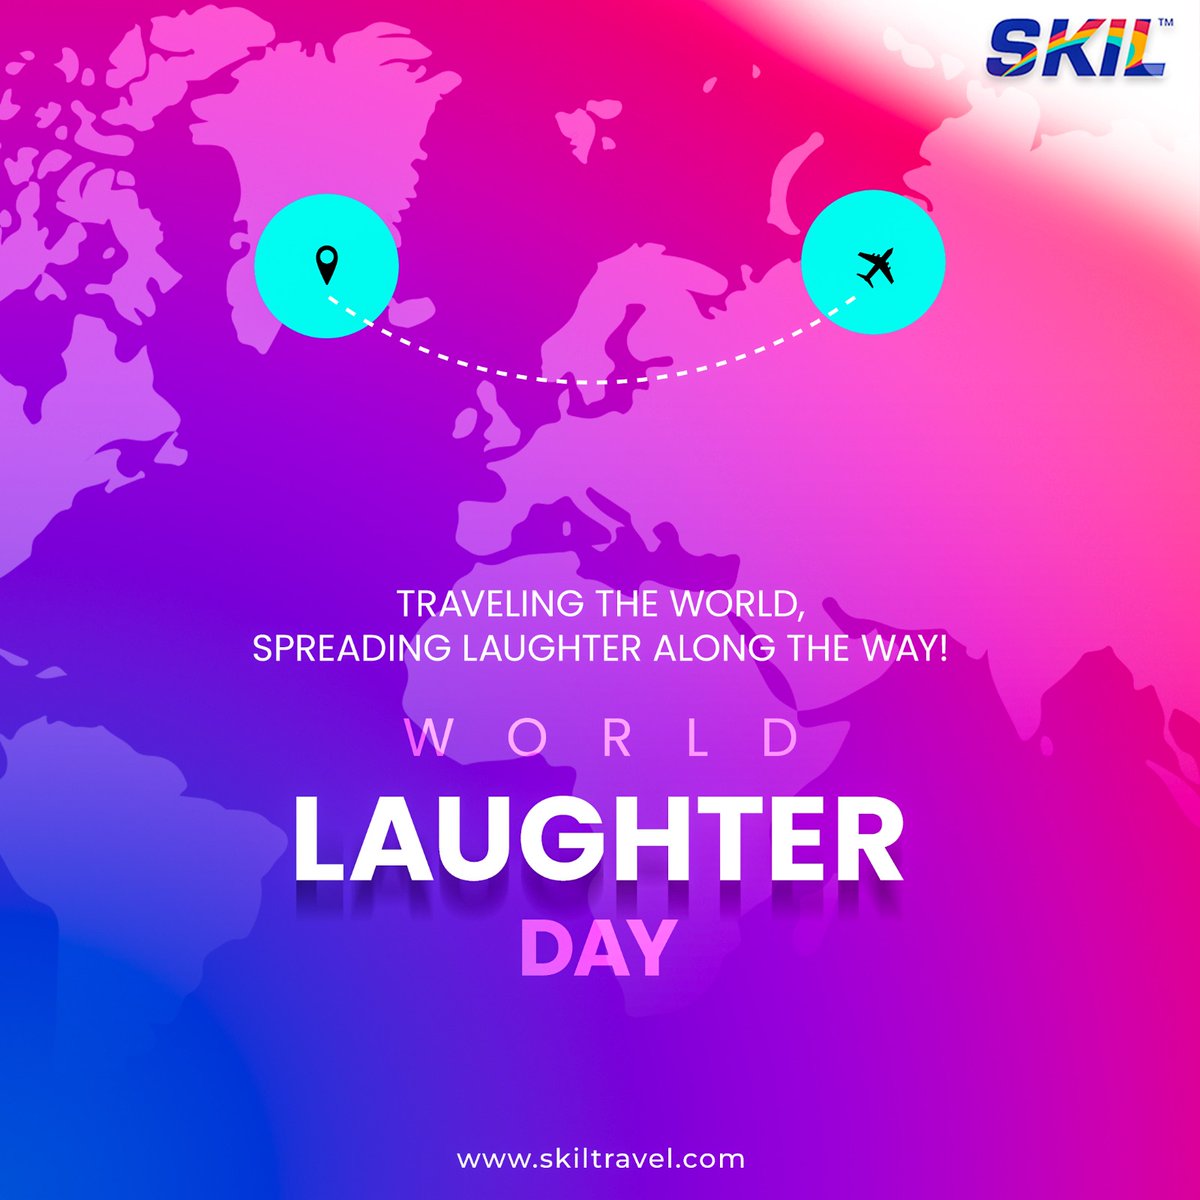 Happy International Laughter Day from SKIL Travel!
😄 Let's add some laughter to your corporate travels with memorable experiences and joyous adventures. 🎉
#SKIL #SKILTravel #worldlaughterday #smilemore #internationallaughterday #goodvibesonly #positiveenergy #spreadhappiness